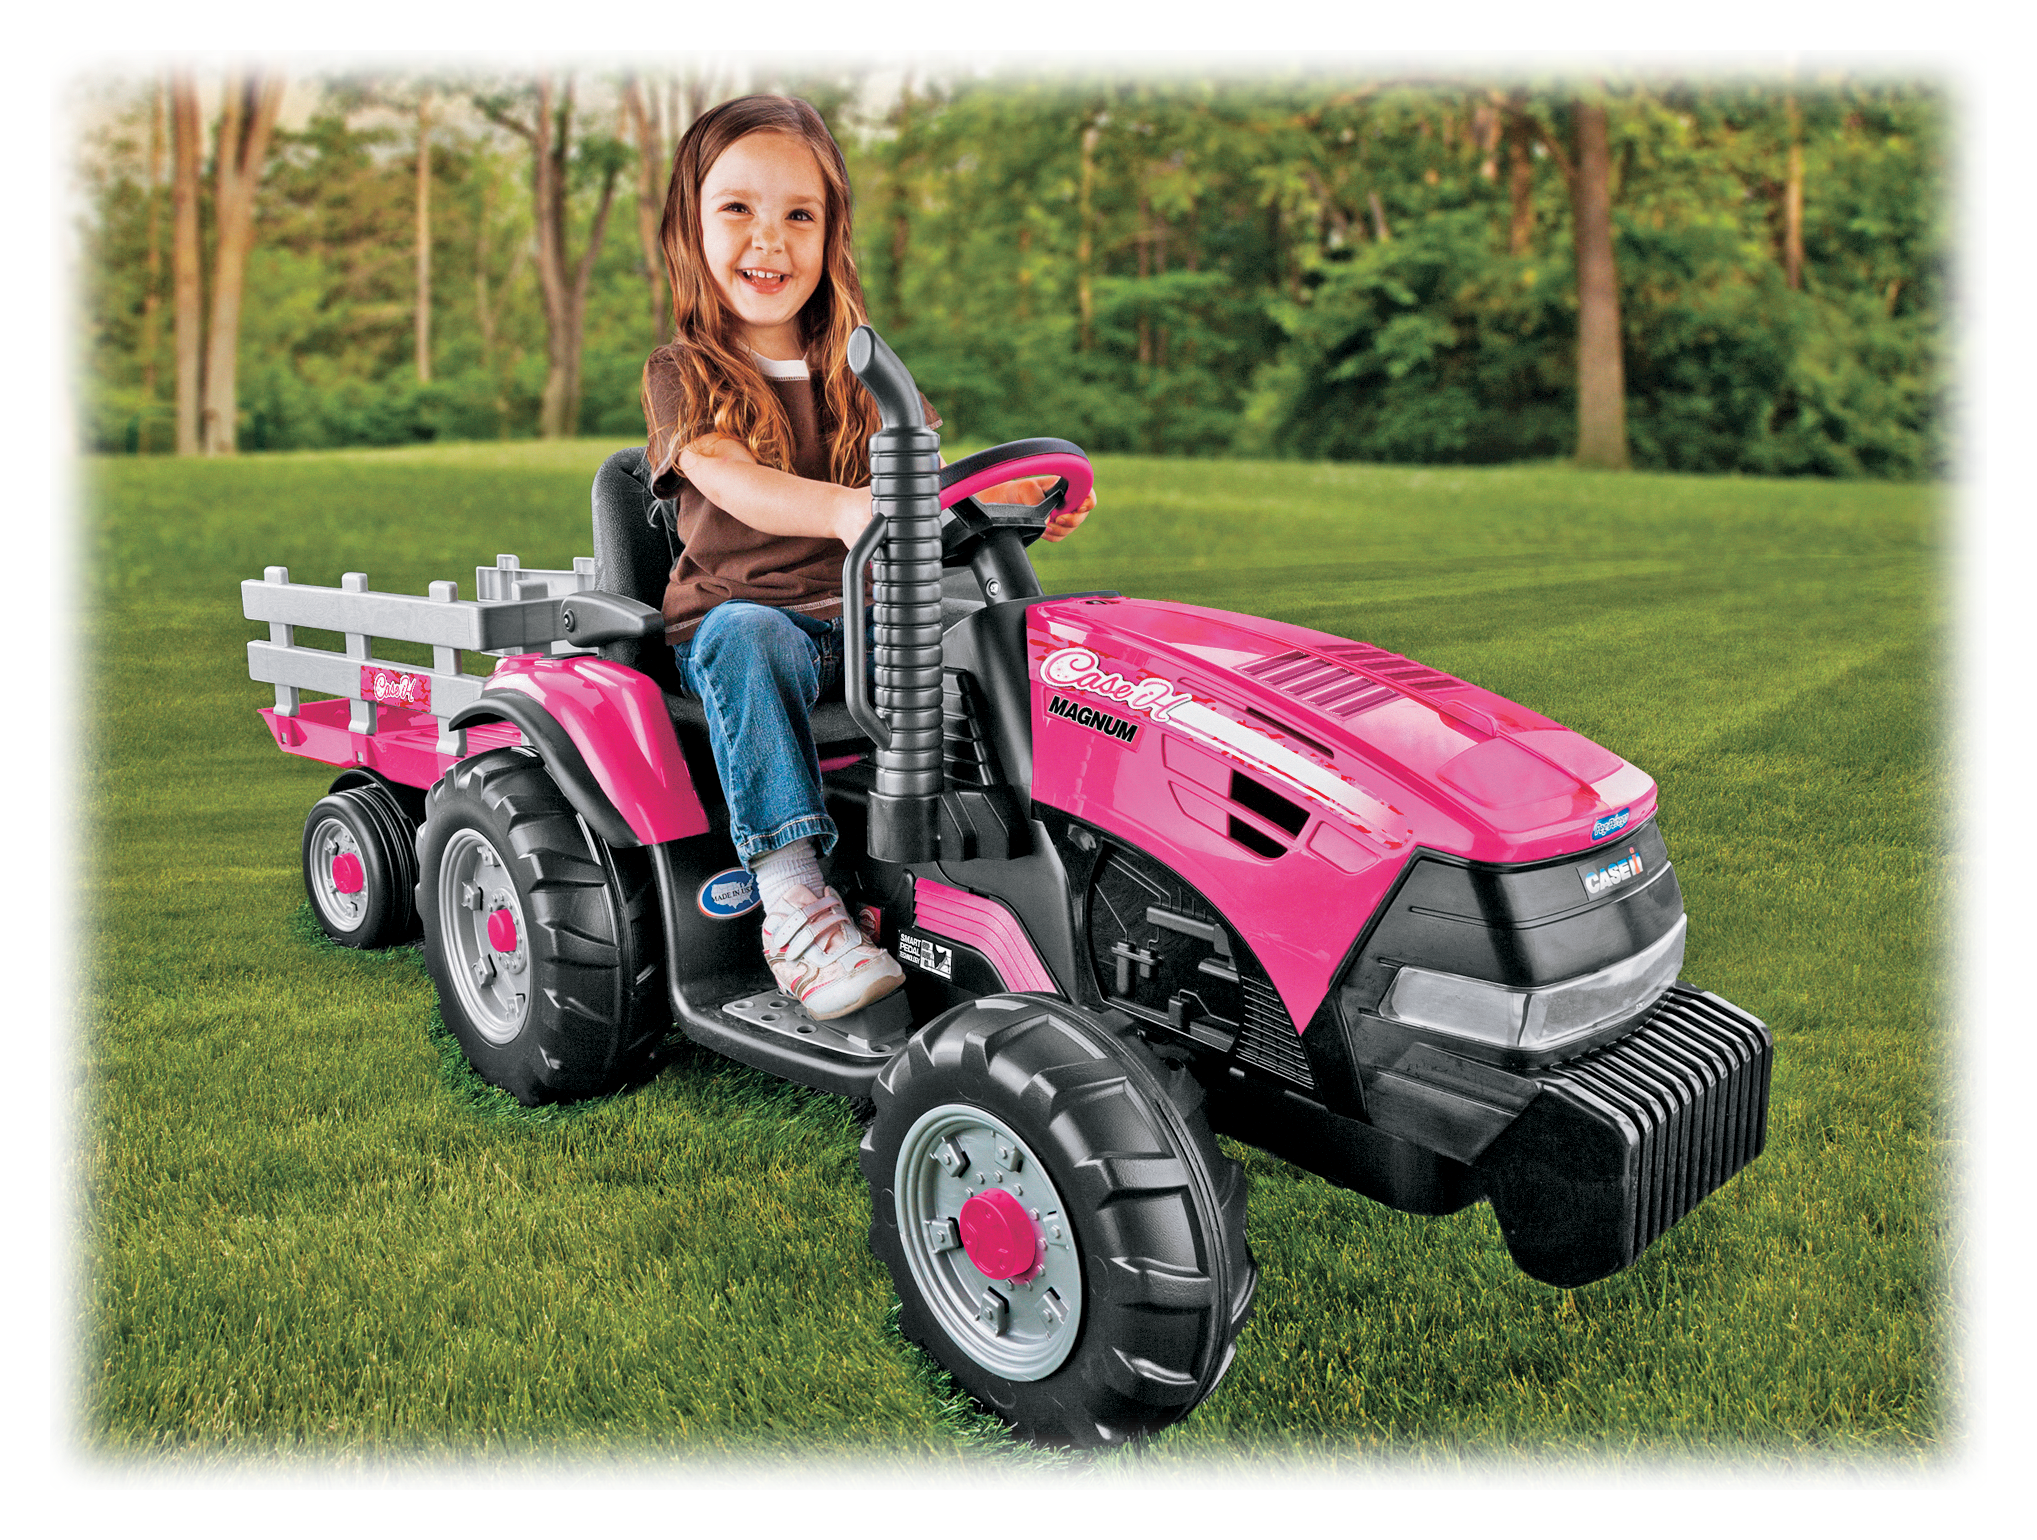 Peg-Perego CASE IH Magnum Tractor/Trailer Ride-On Toy for Kids - Pink -  Peg Perego